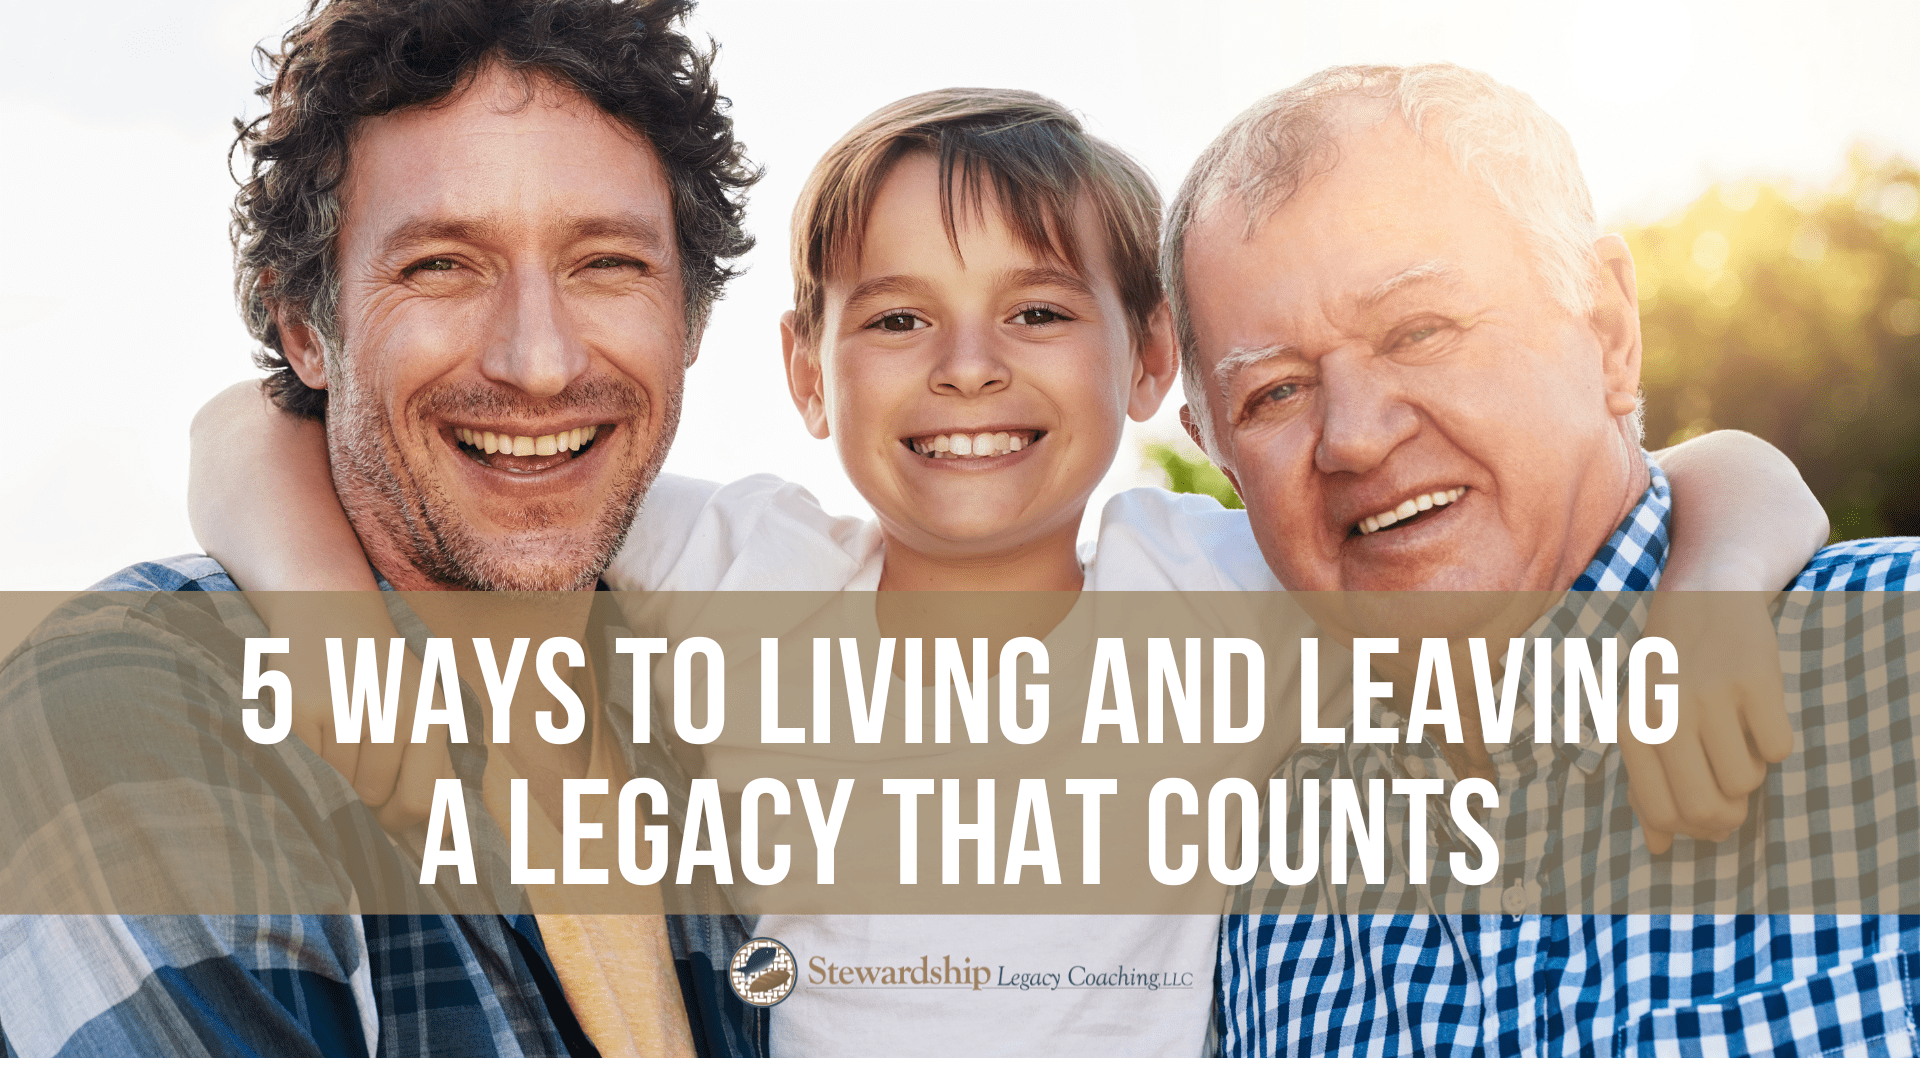 5 ways to living and leaving a legacy that counts.